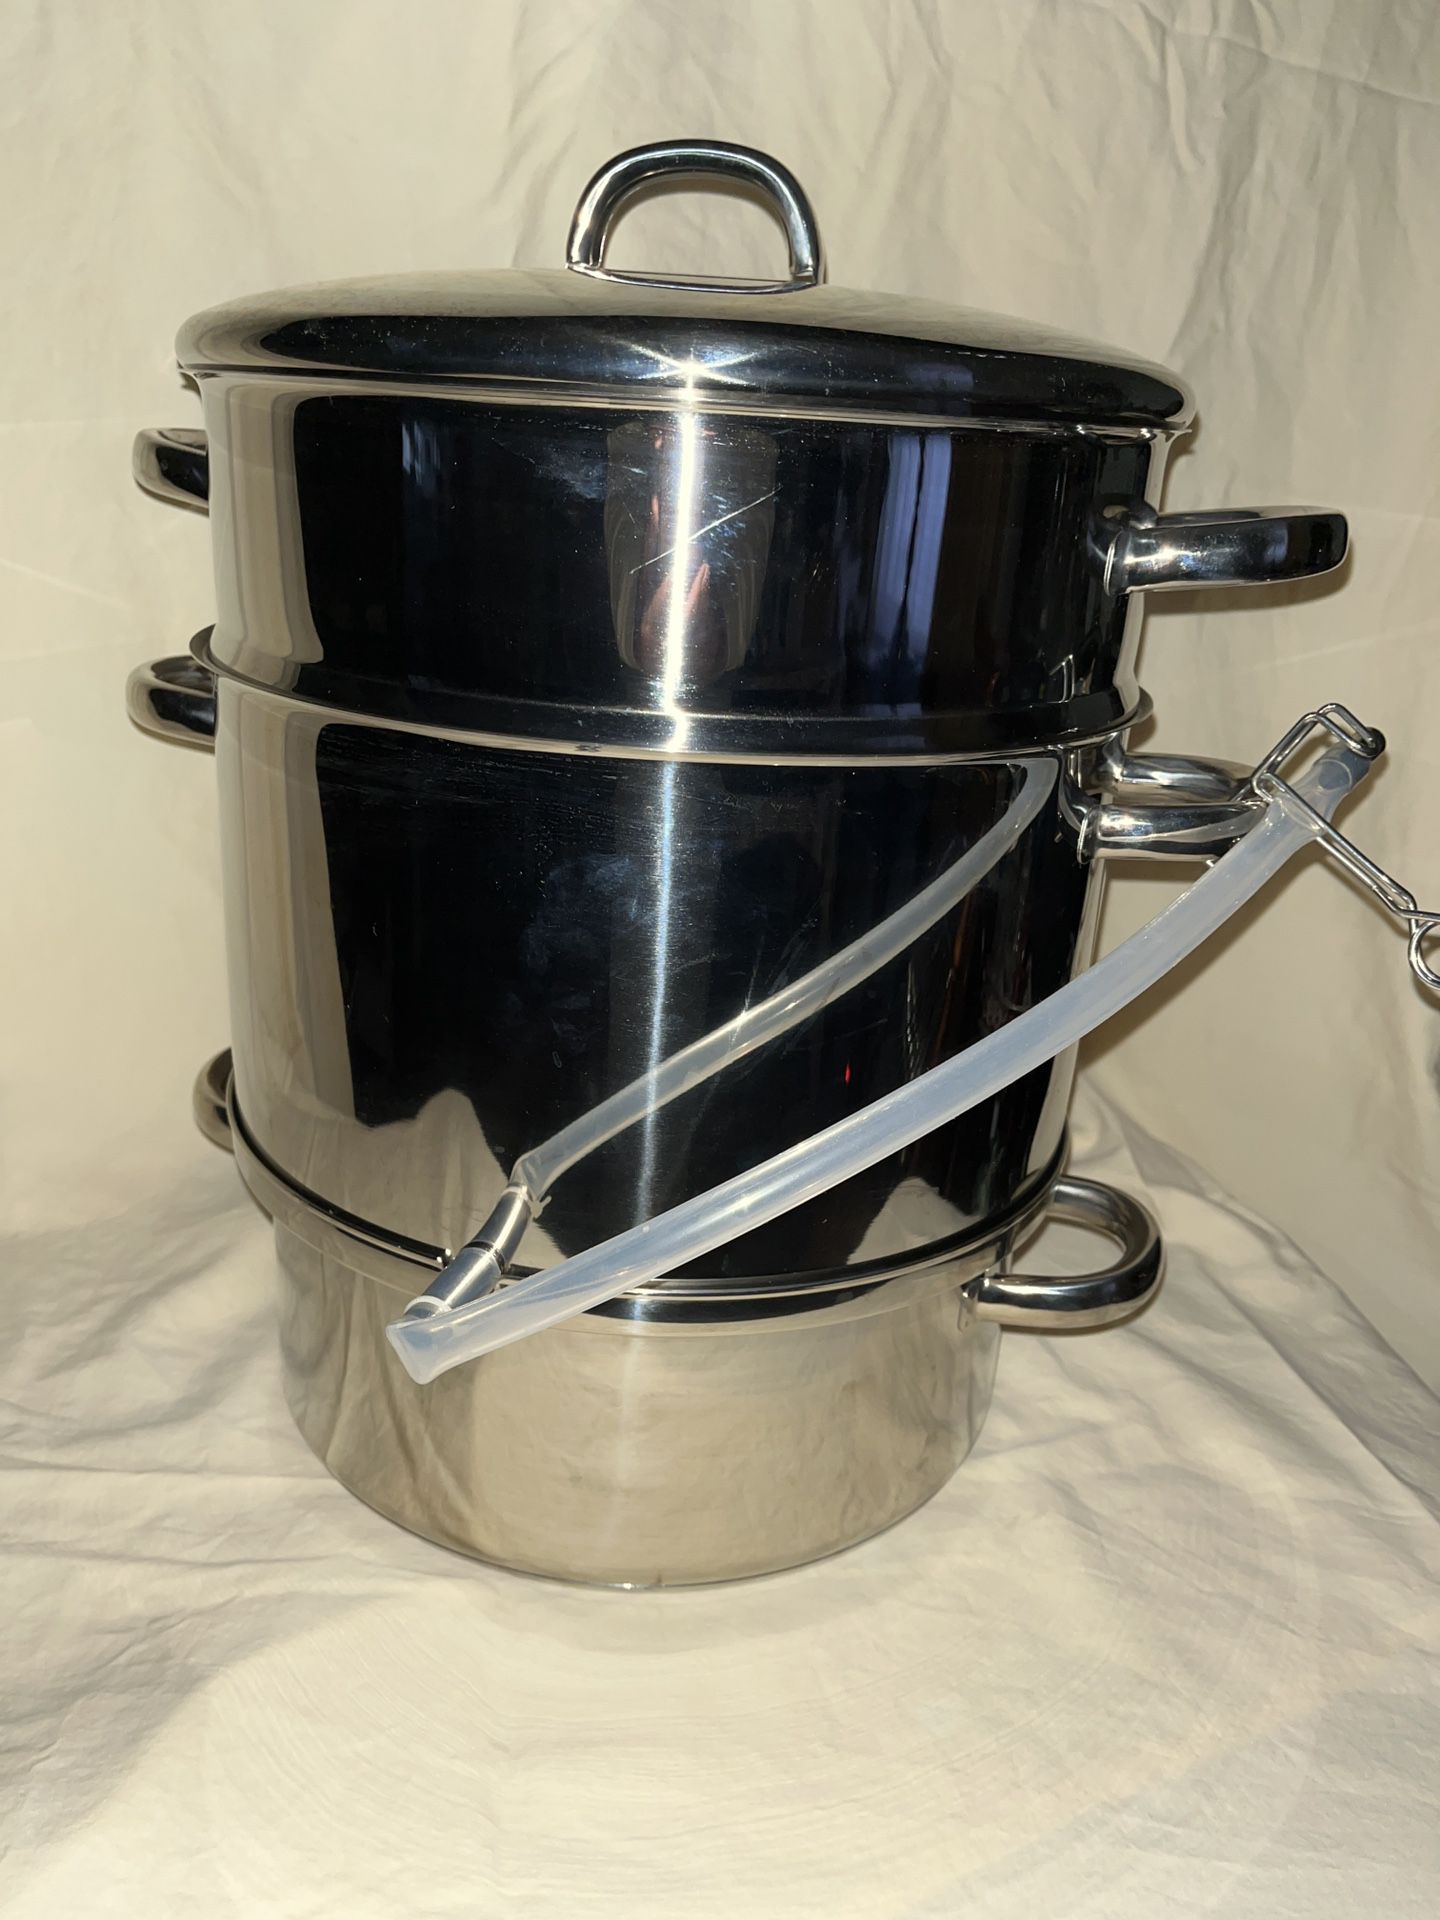 Steam Juicer for Sale in Acton, CA - OfferUp